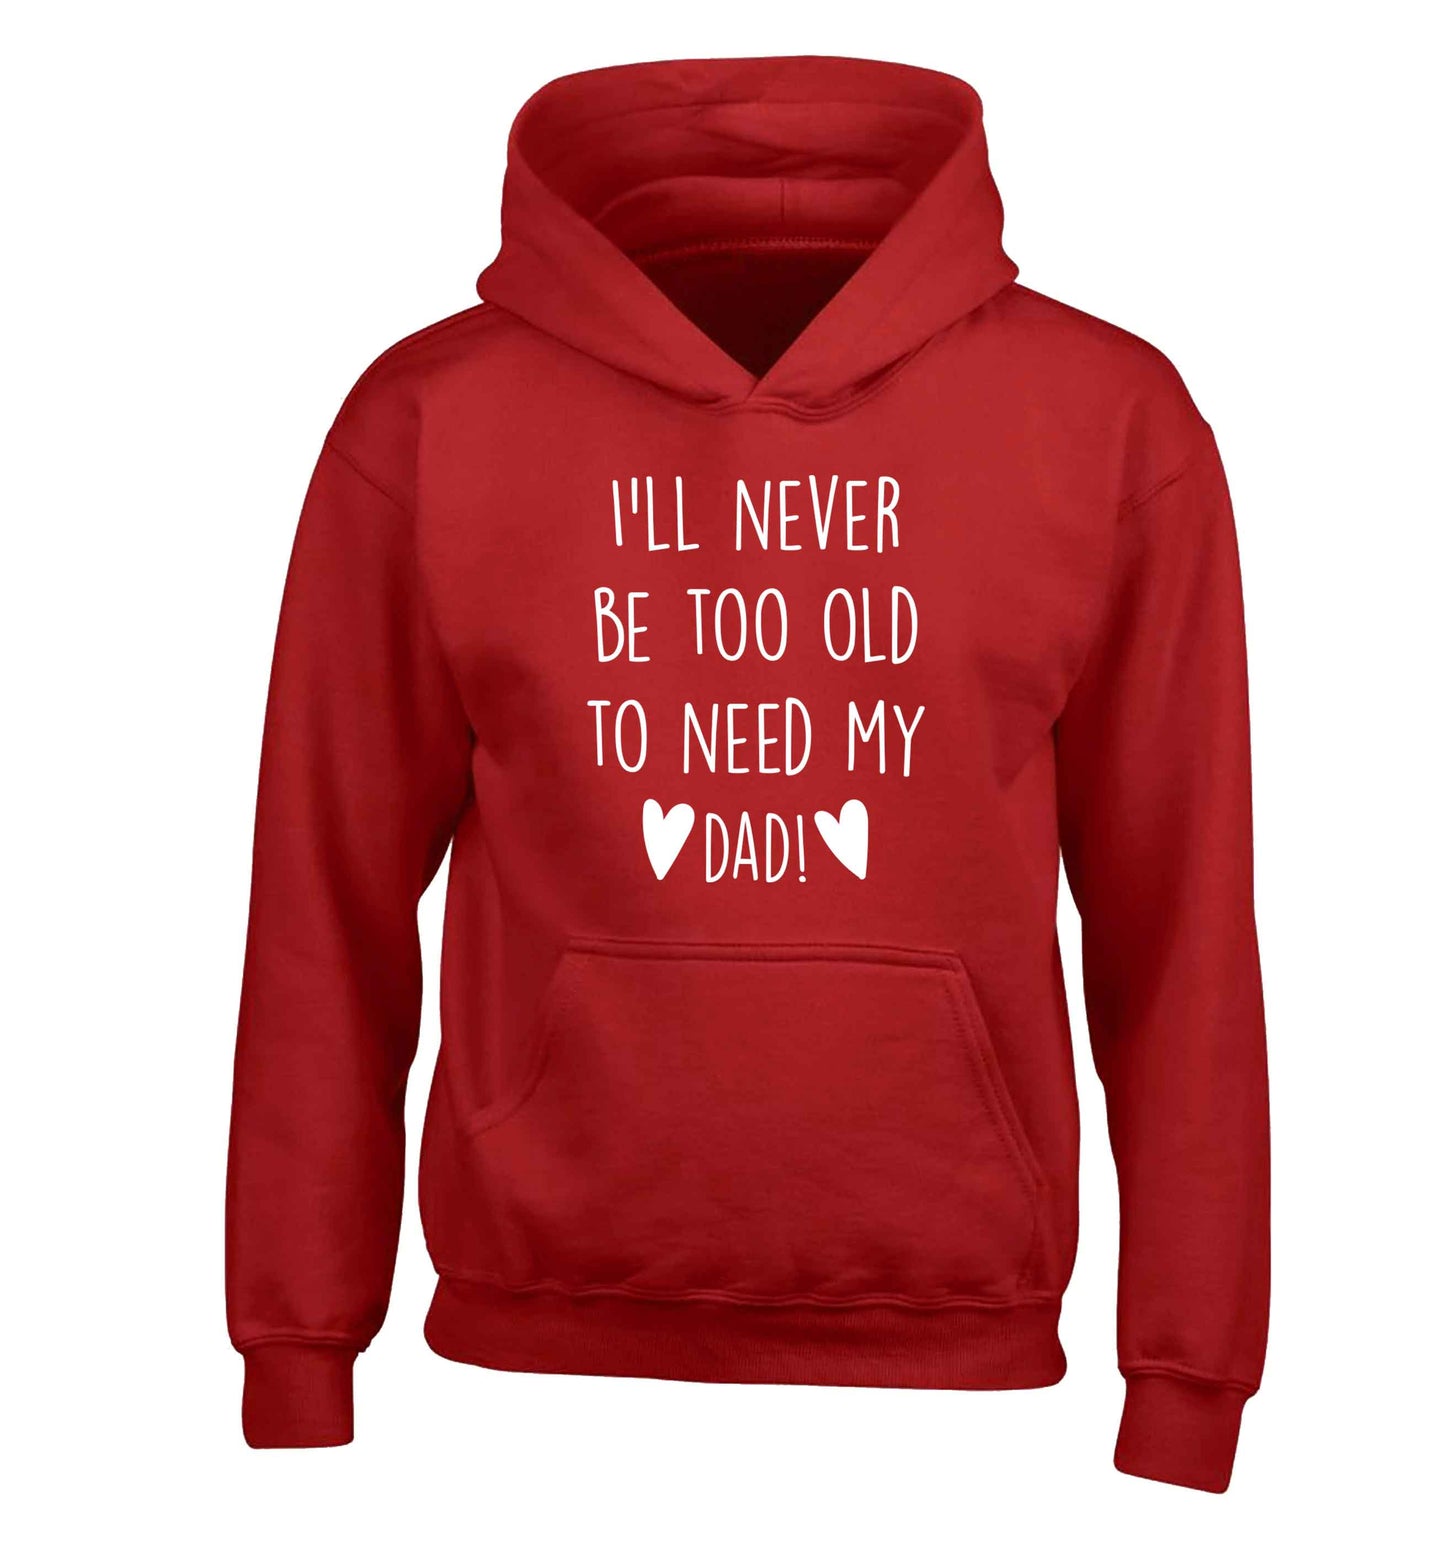 I'll never be too old to need my dad children's red hoodie 12-13 Years